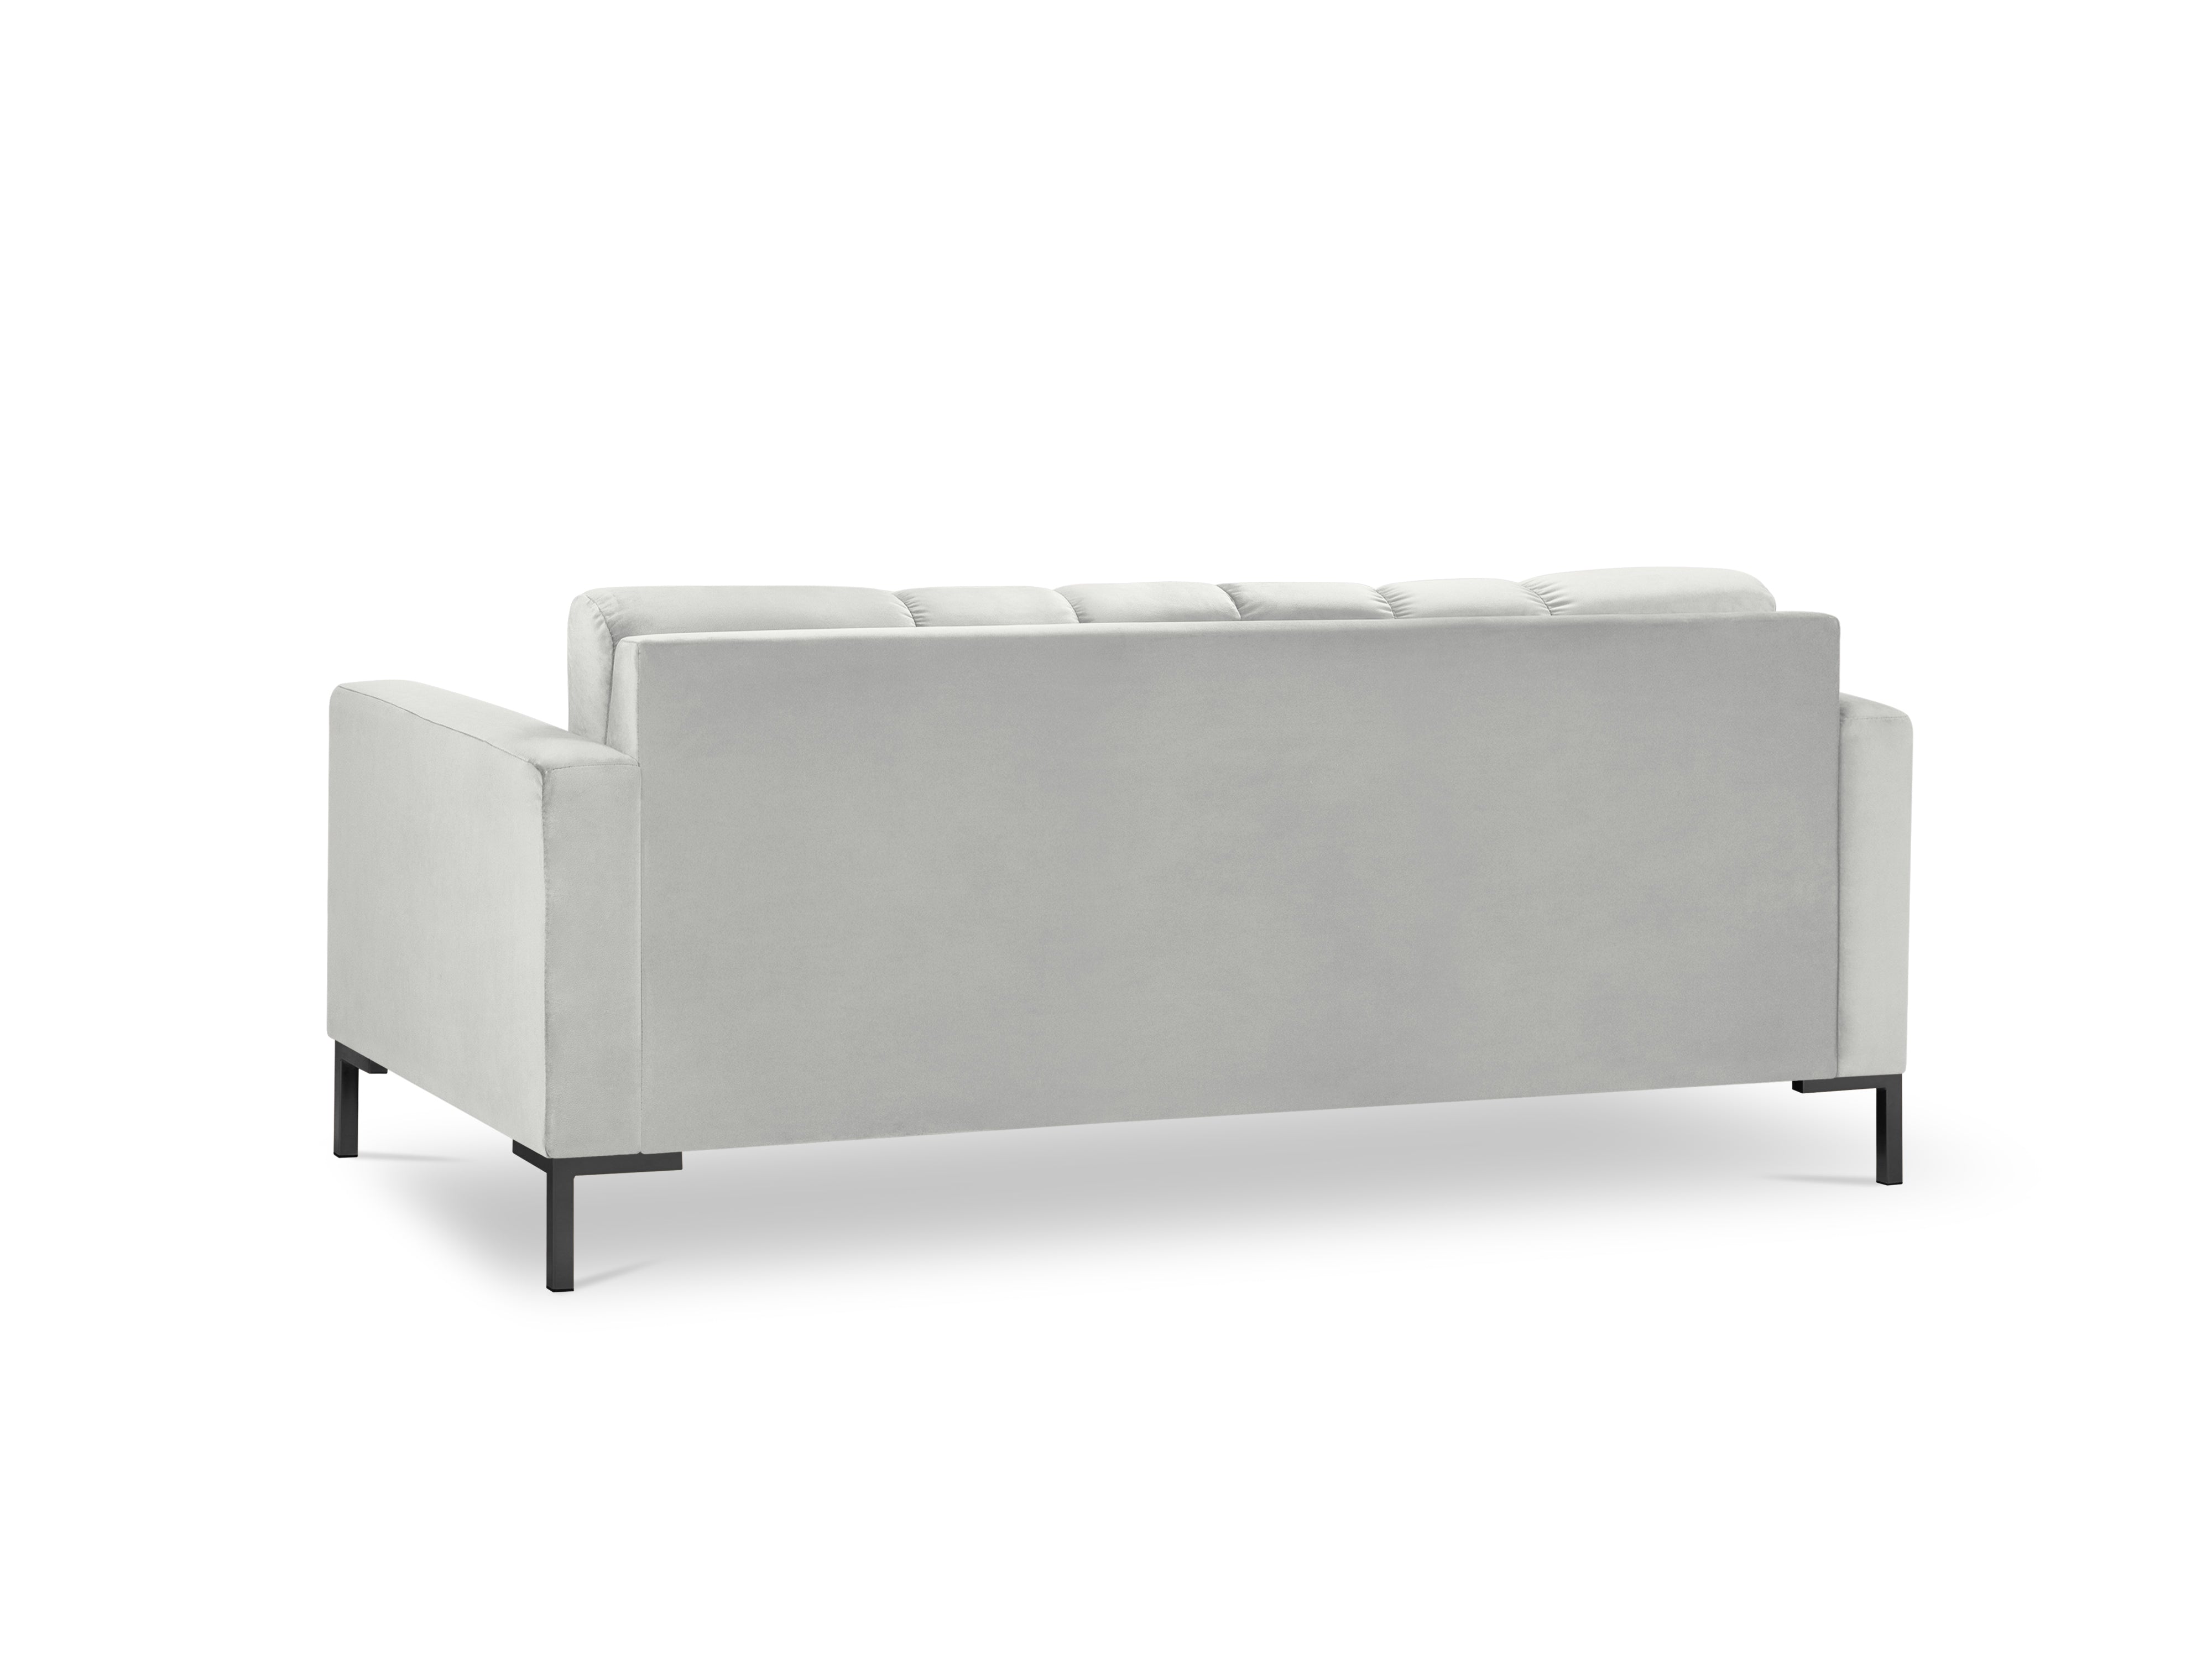 Silver sofa with a black base